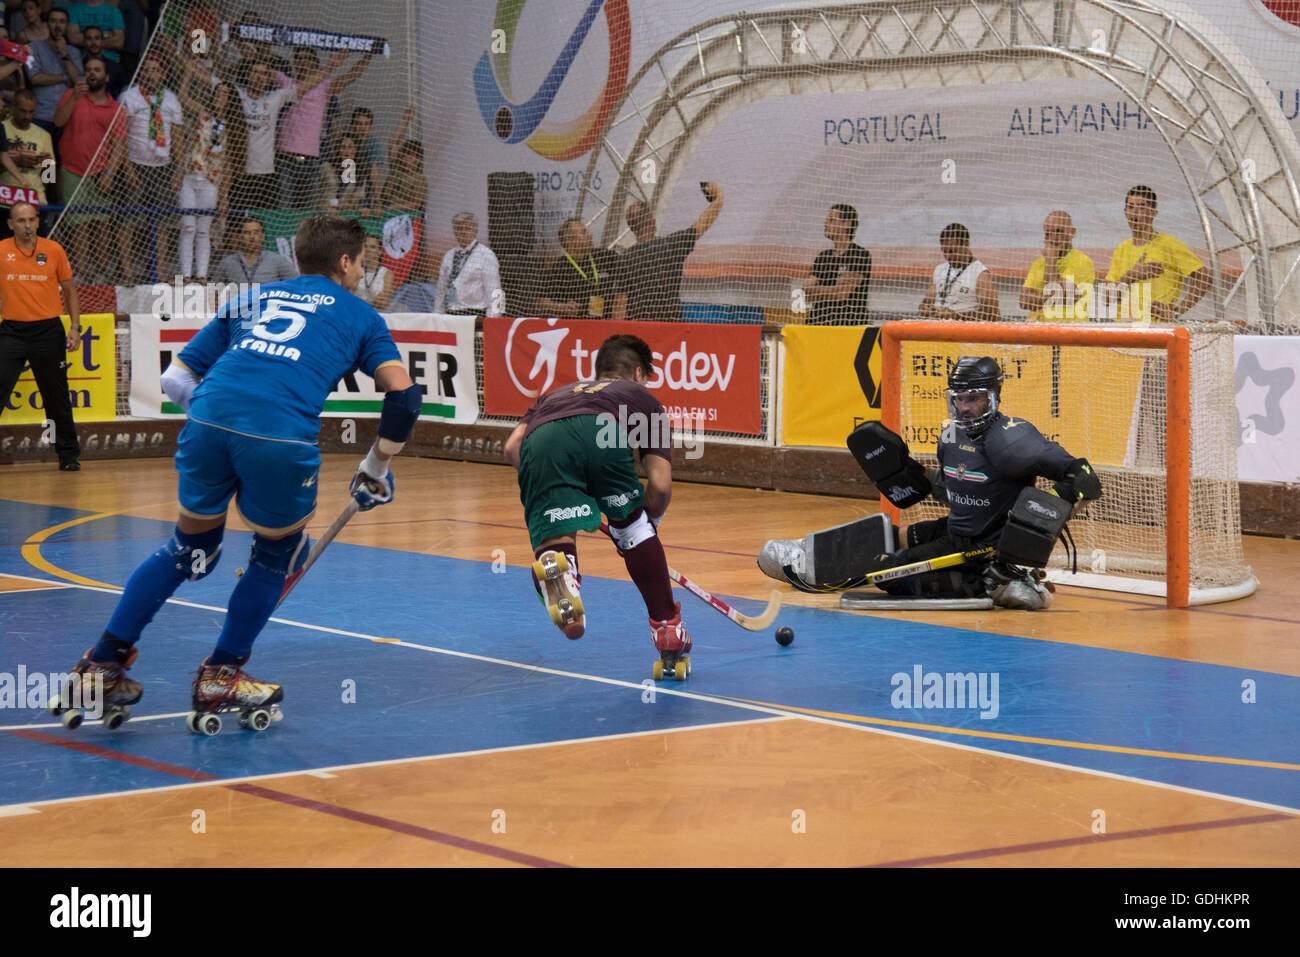 Portugal plays Italy in the finals of the CERH European Roller Hockey Championship tournament in Oliveira de Azemeis, Portugal. Portugal went on to win the game 6-2 Stock Photo